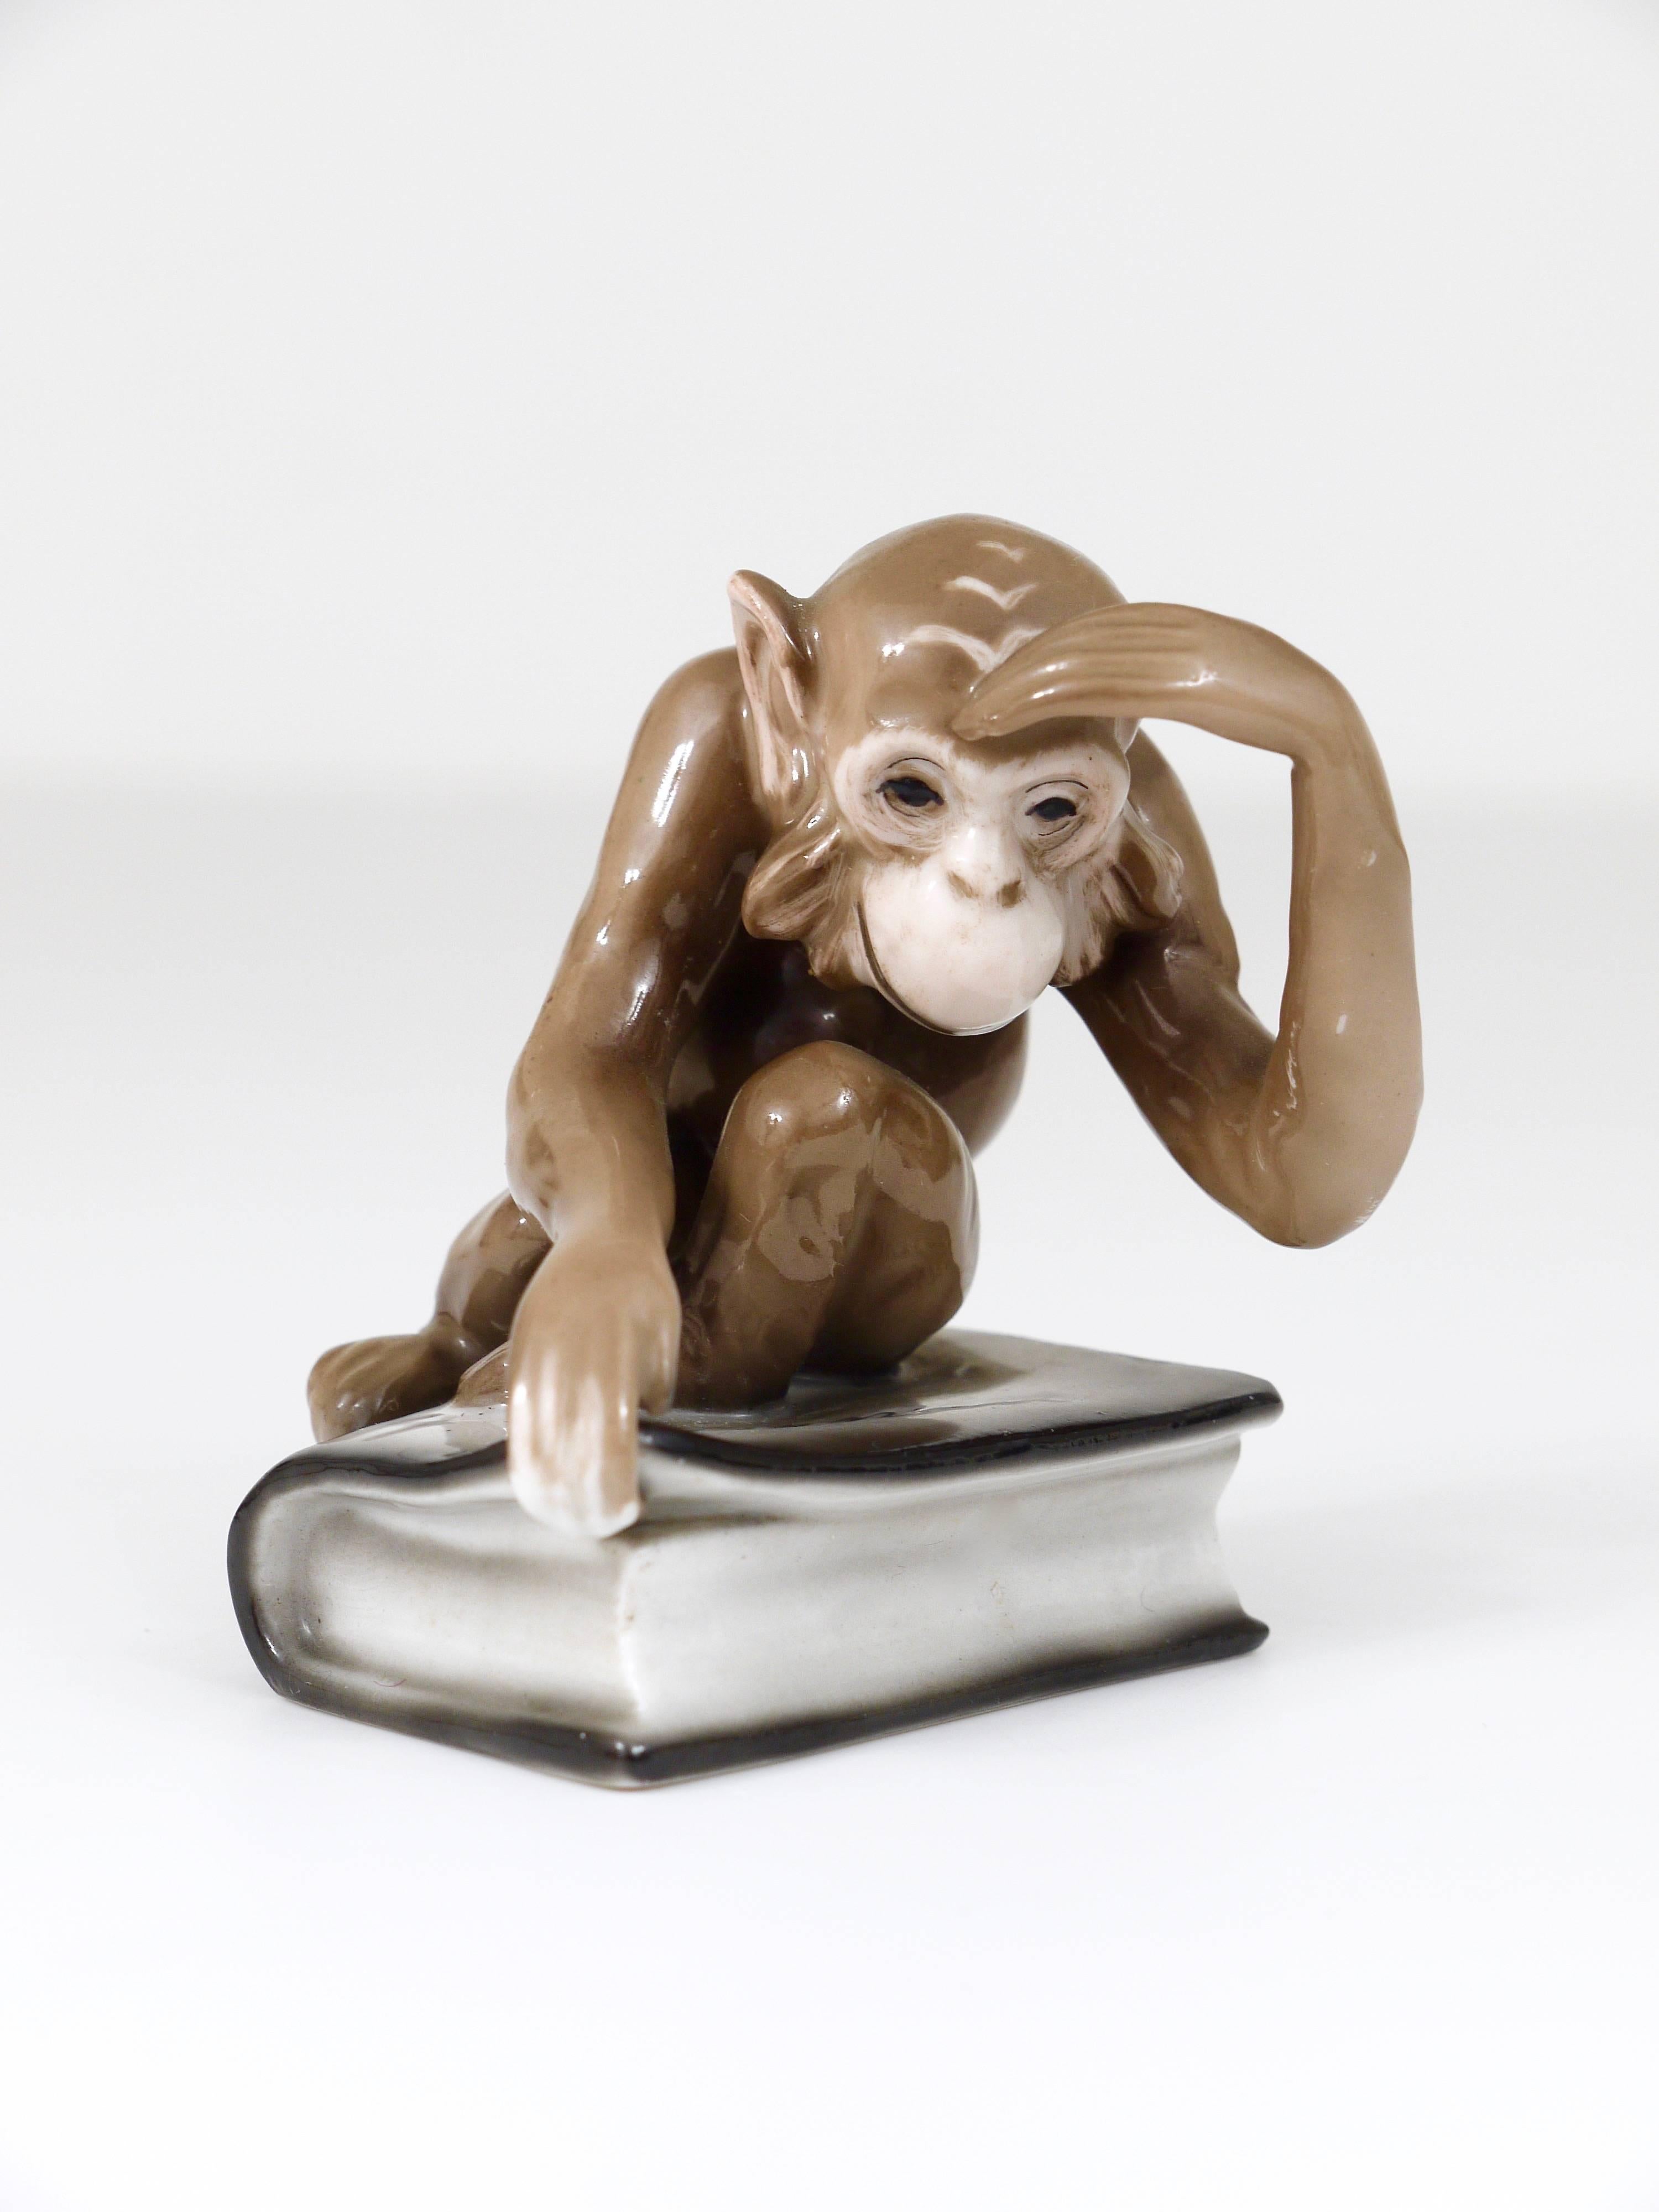 An unusual porcelain figurine displaying a monkey sitting on a book by Charles Darwin. This nice figurine was manufactured by Haas & Czjzek, Schlaggenwald, Bohemia in the 1940s. In excellent condition. 